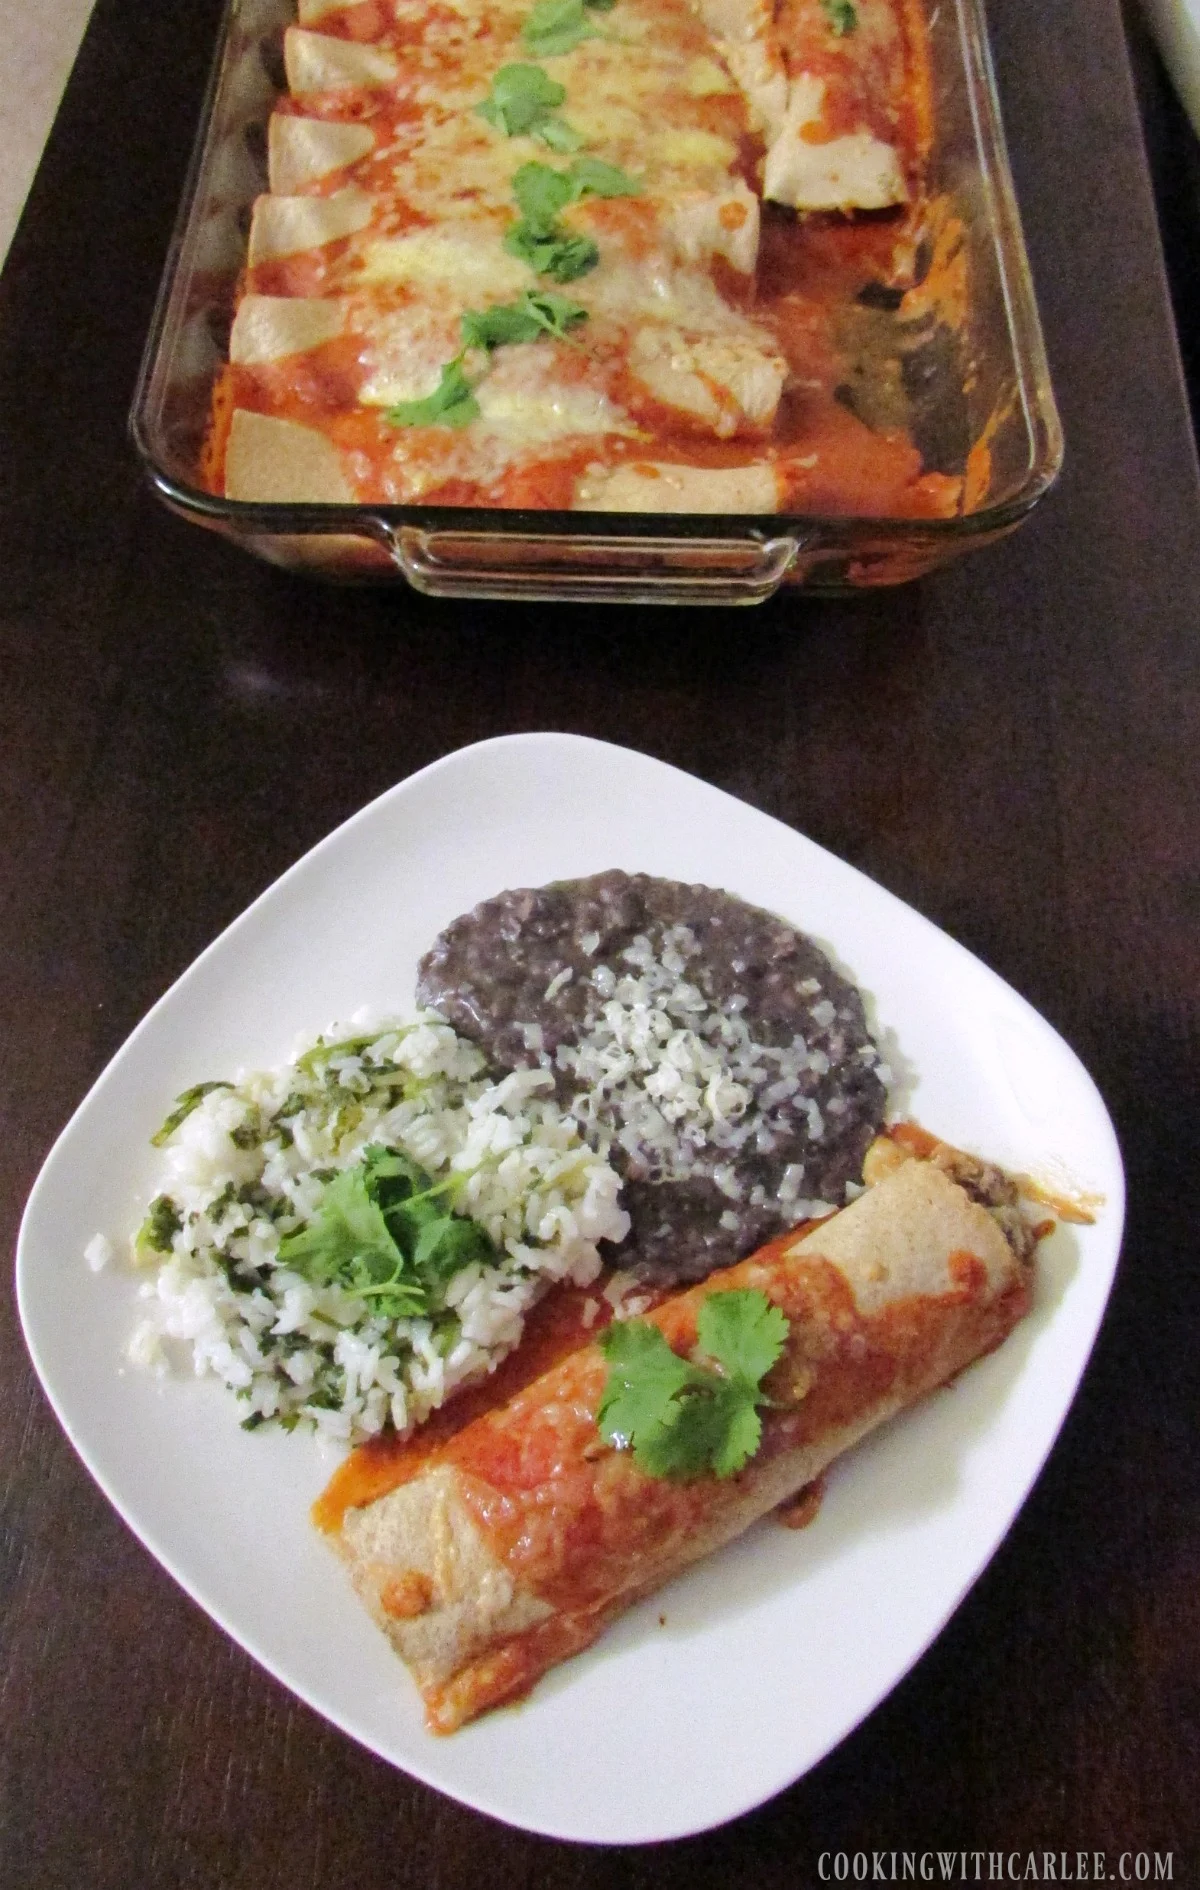 enchilada dinner in front of pan of remaining panful.